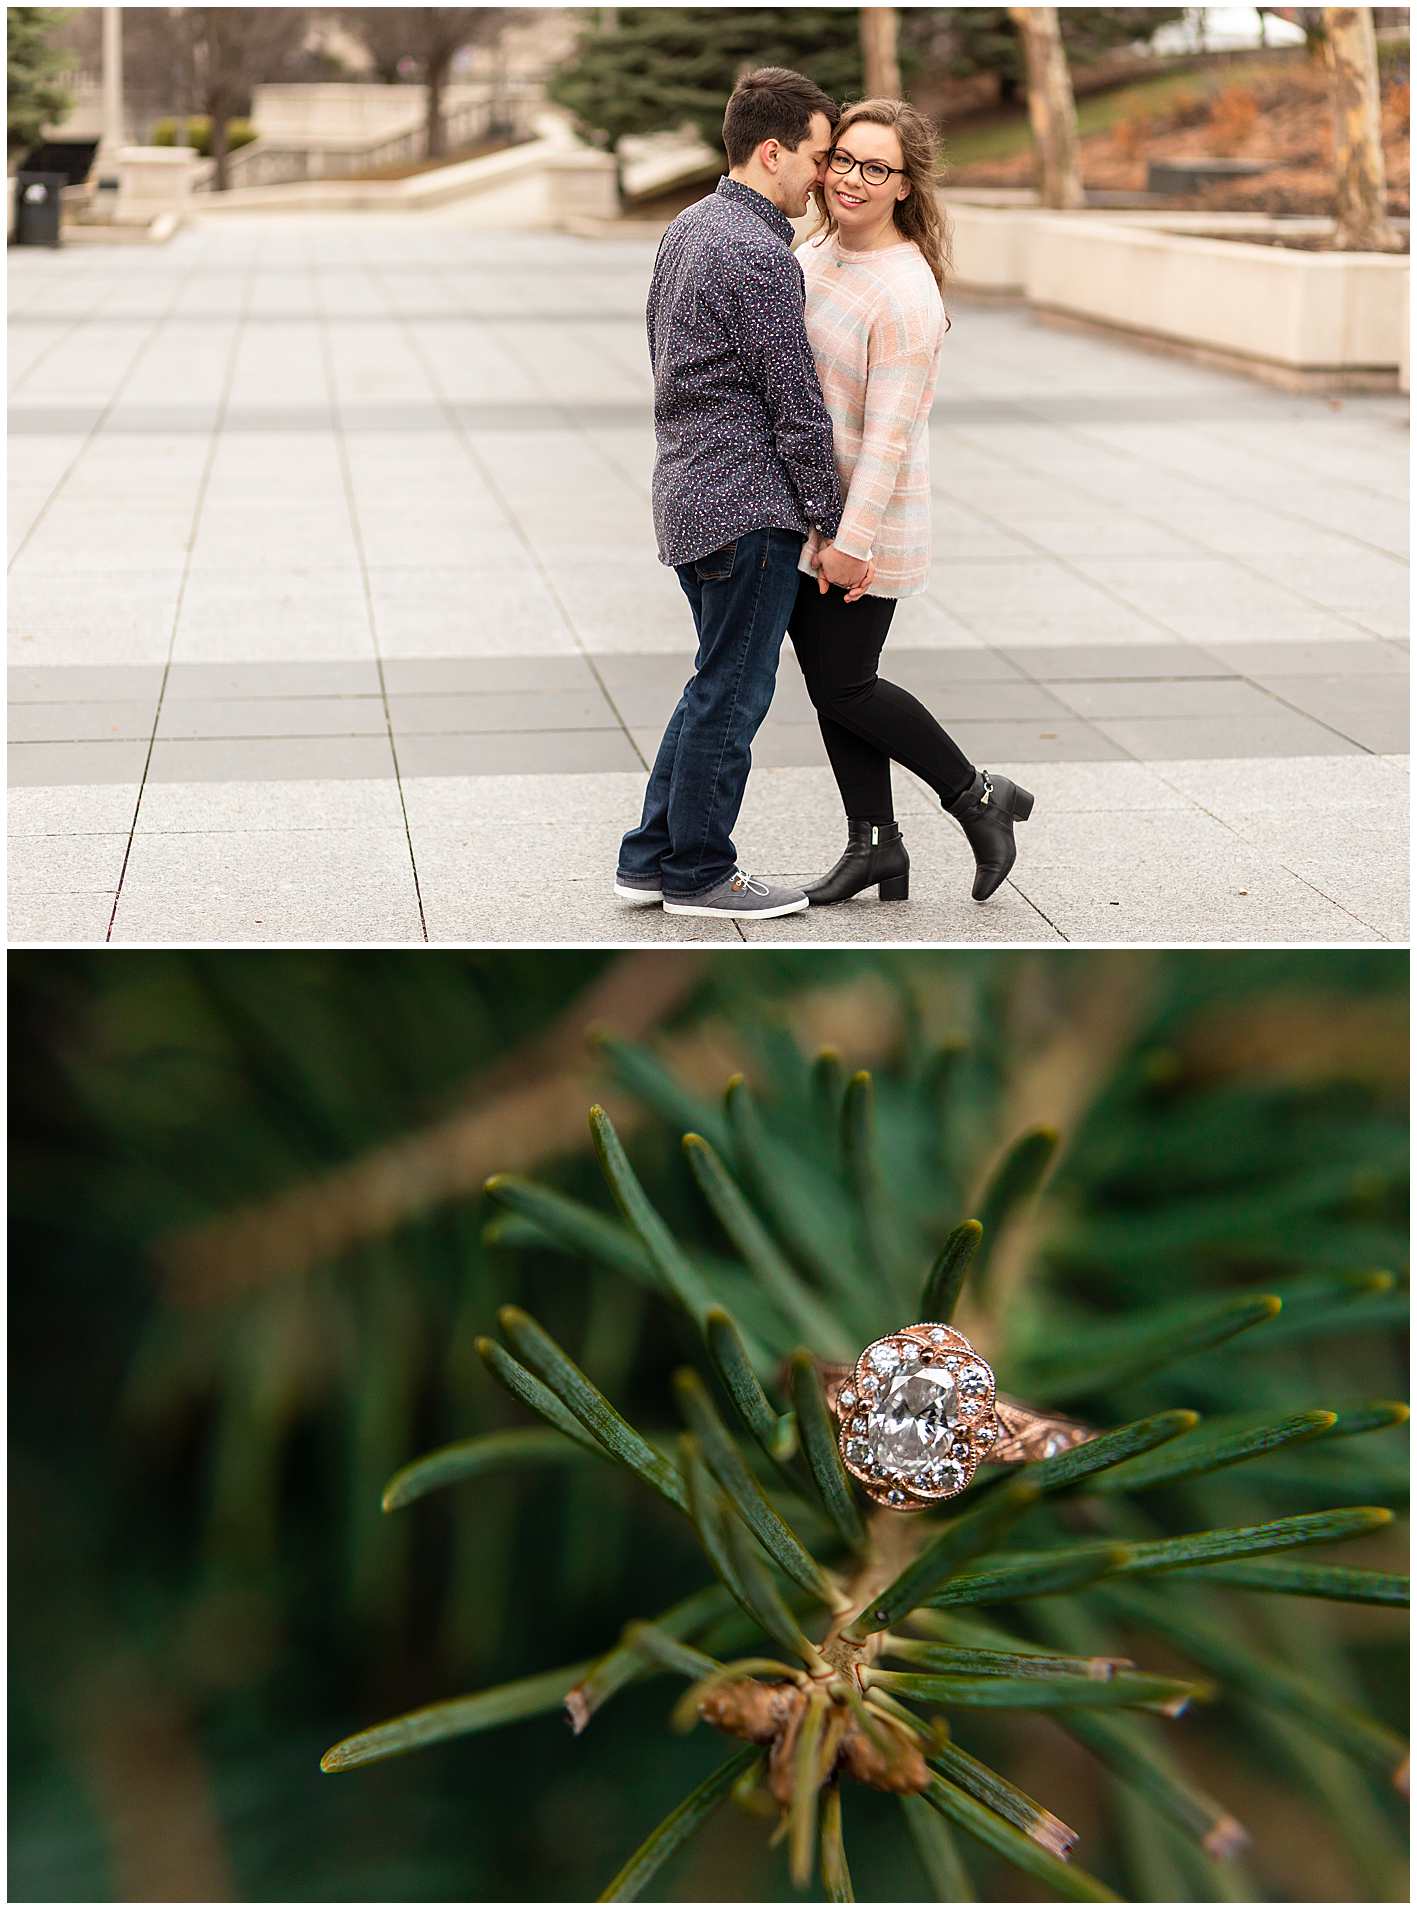 Downtown Chicago Engagement, Custom IL Engagement Ring in Evergreen Tree